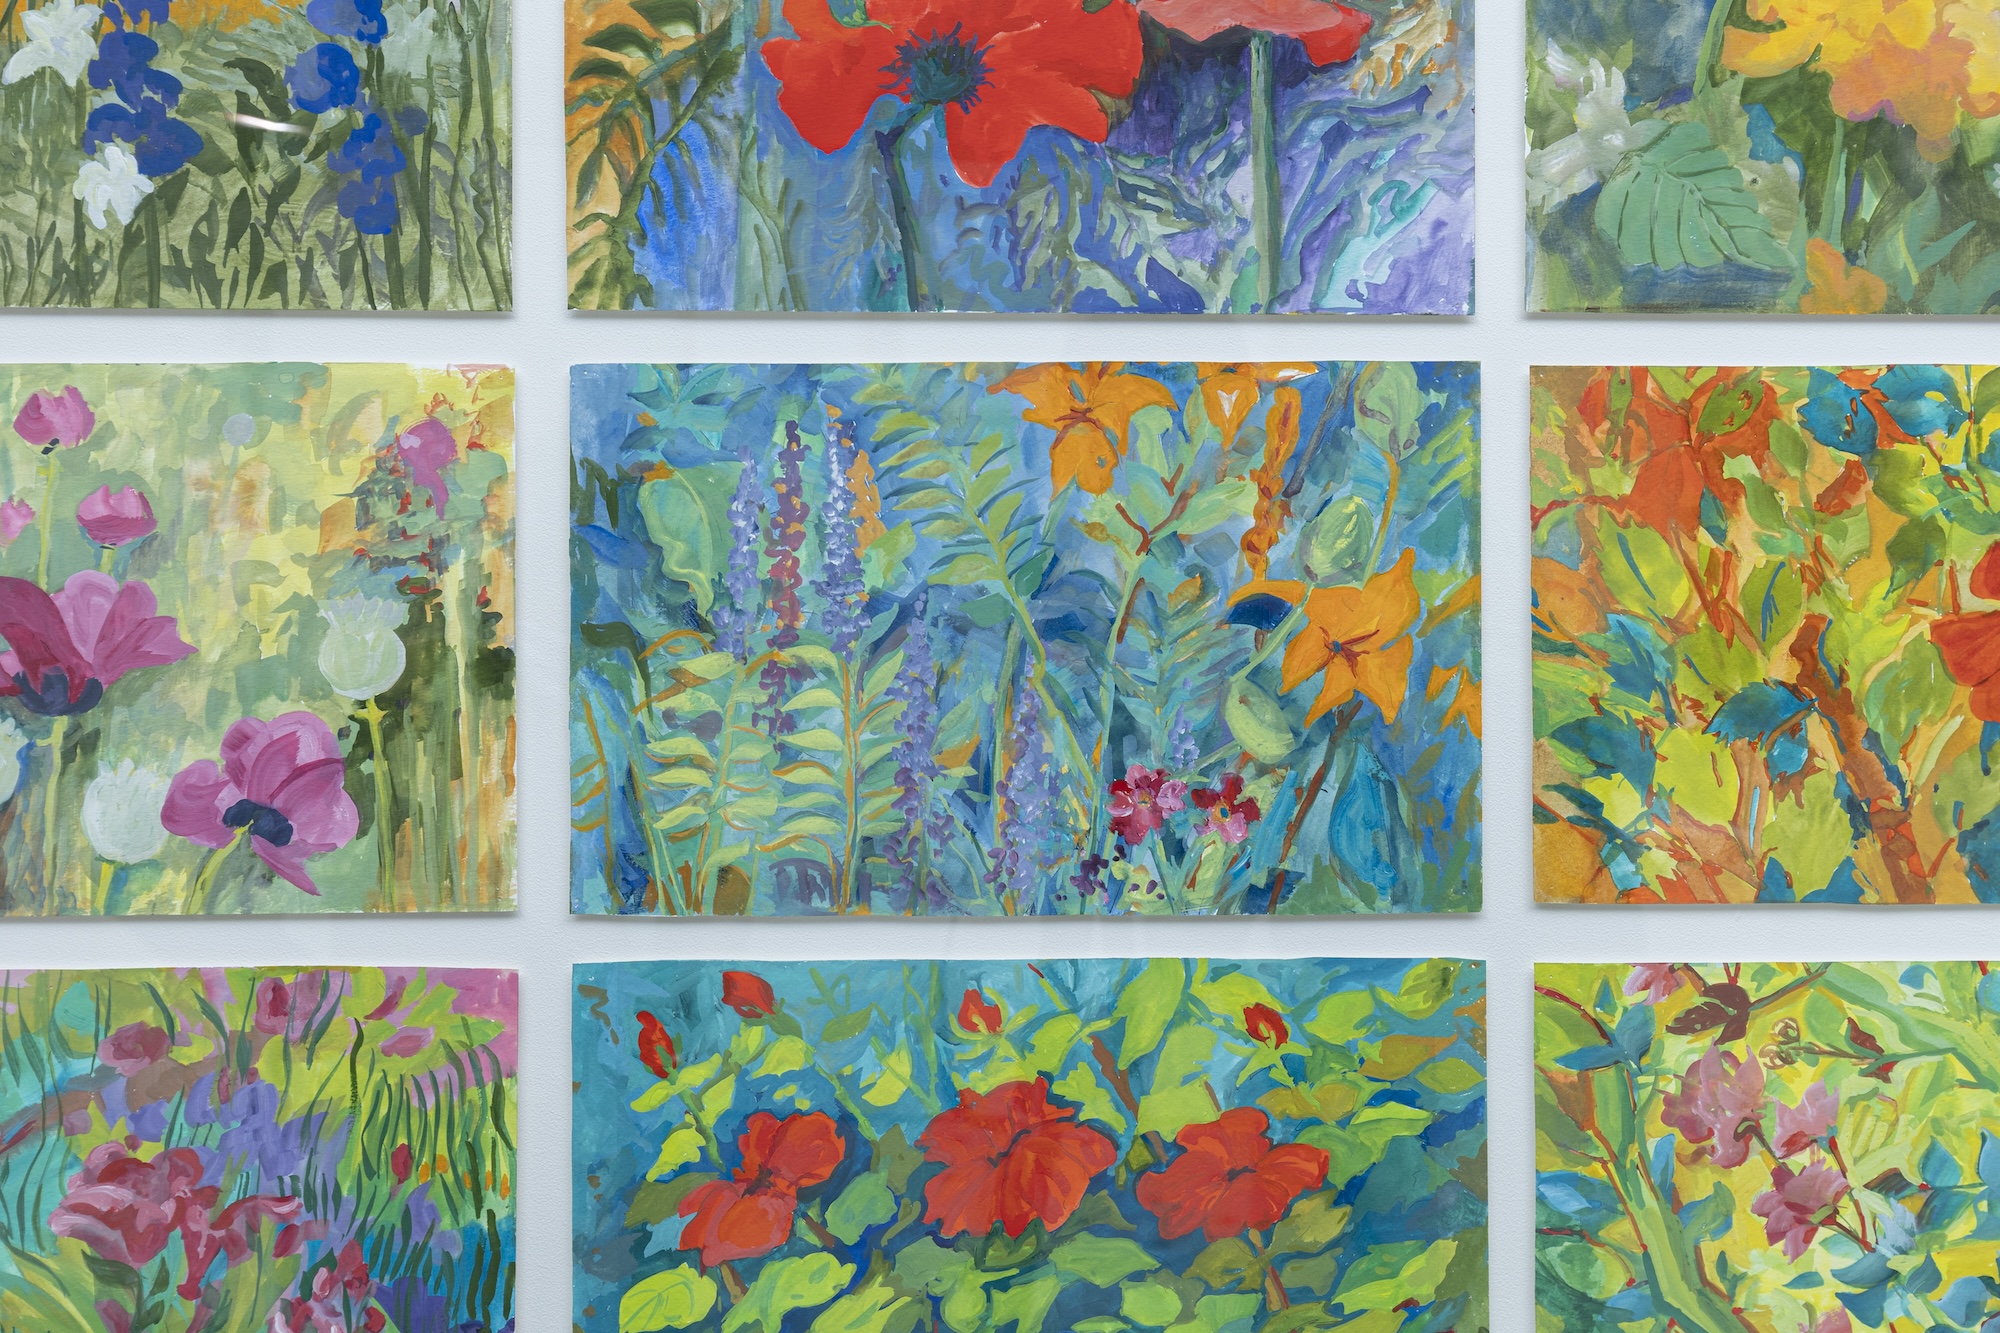 Colorful paintings of flowers hung in a grid